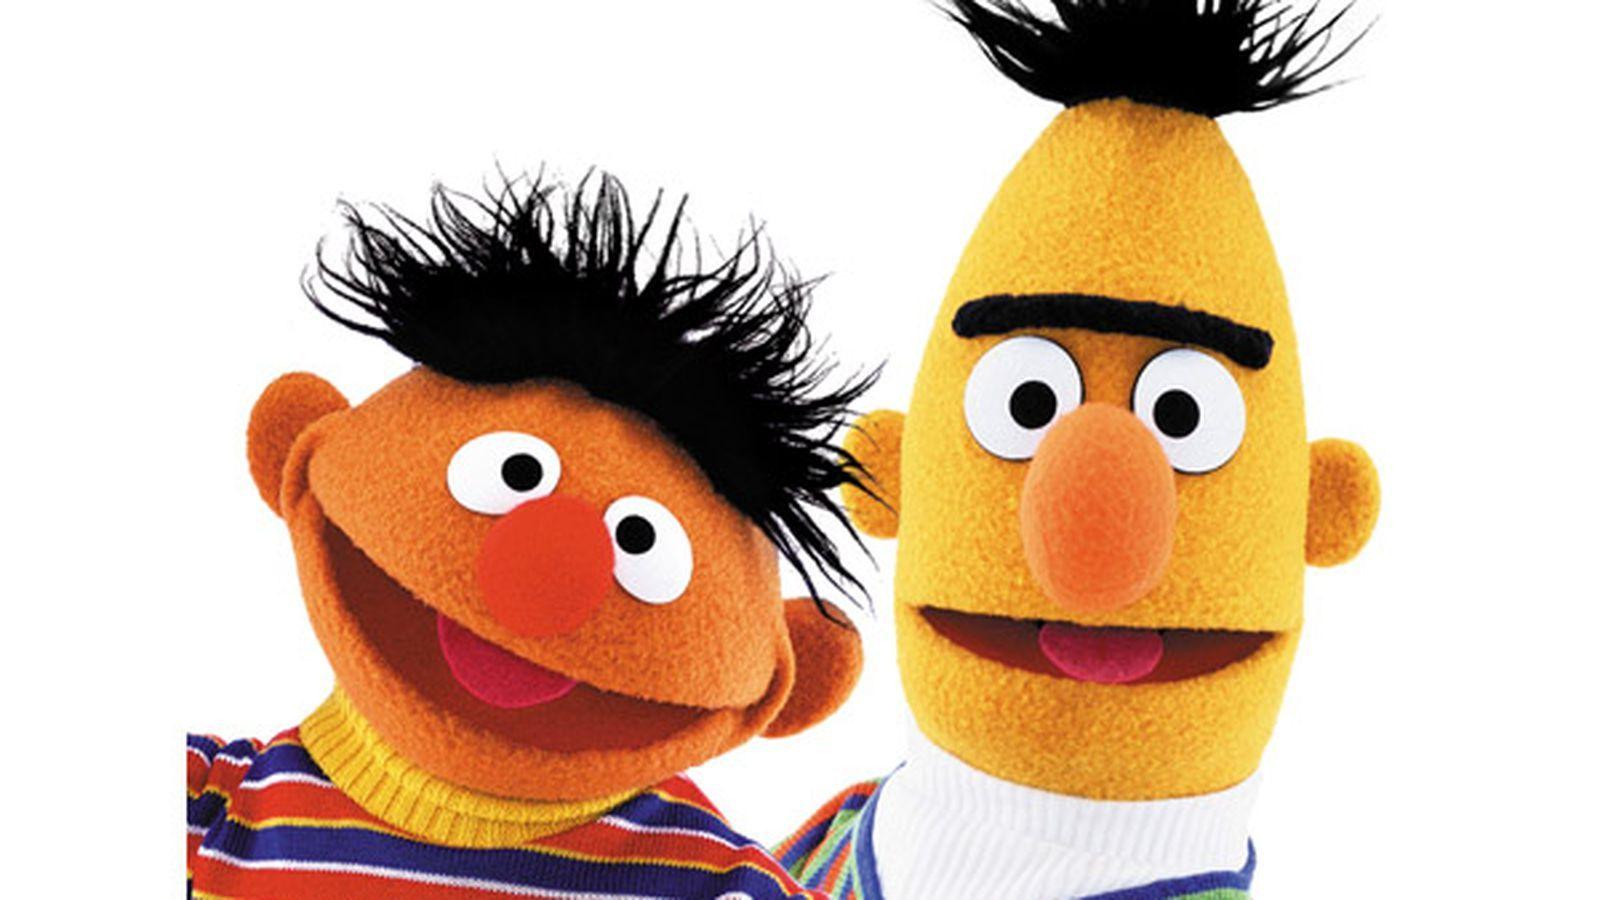 Behind the scenes: Bert and Ernie recording voices for TomTom